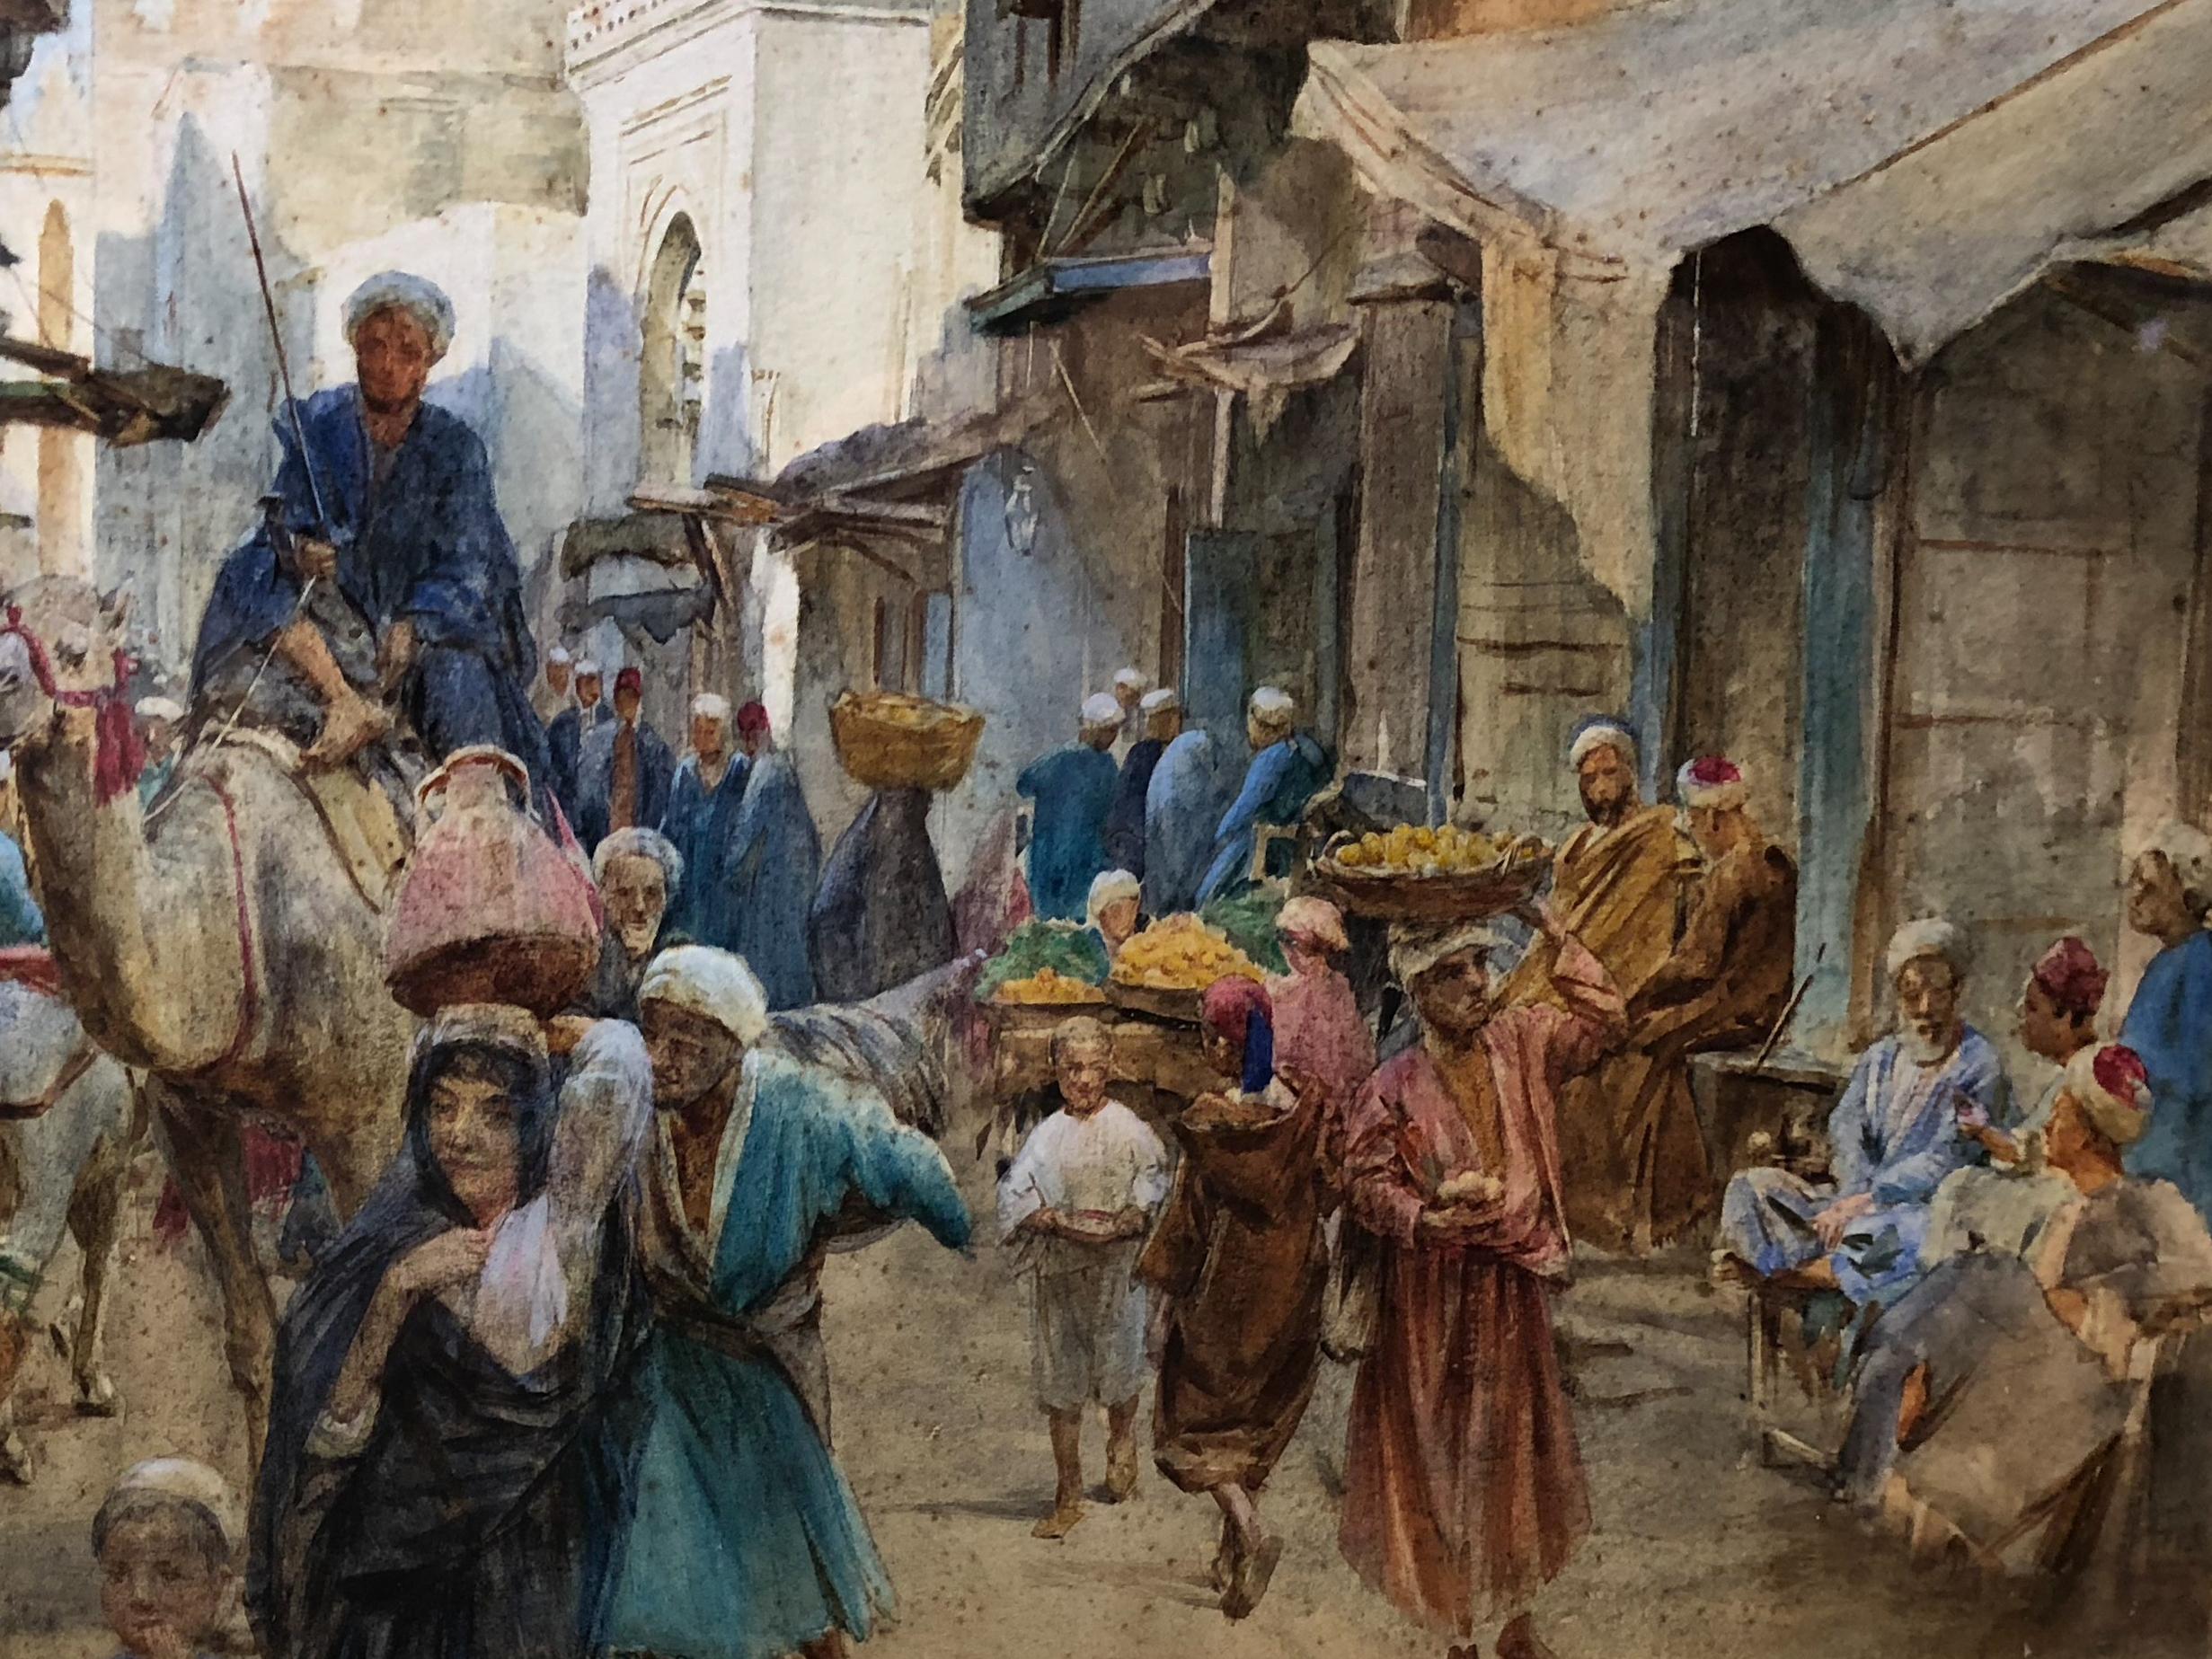 Bazaar Scene in Cairo - Brown Landscape Painting by WALTER FREDERICK ROOFE TYNDALE